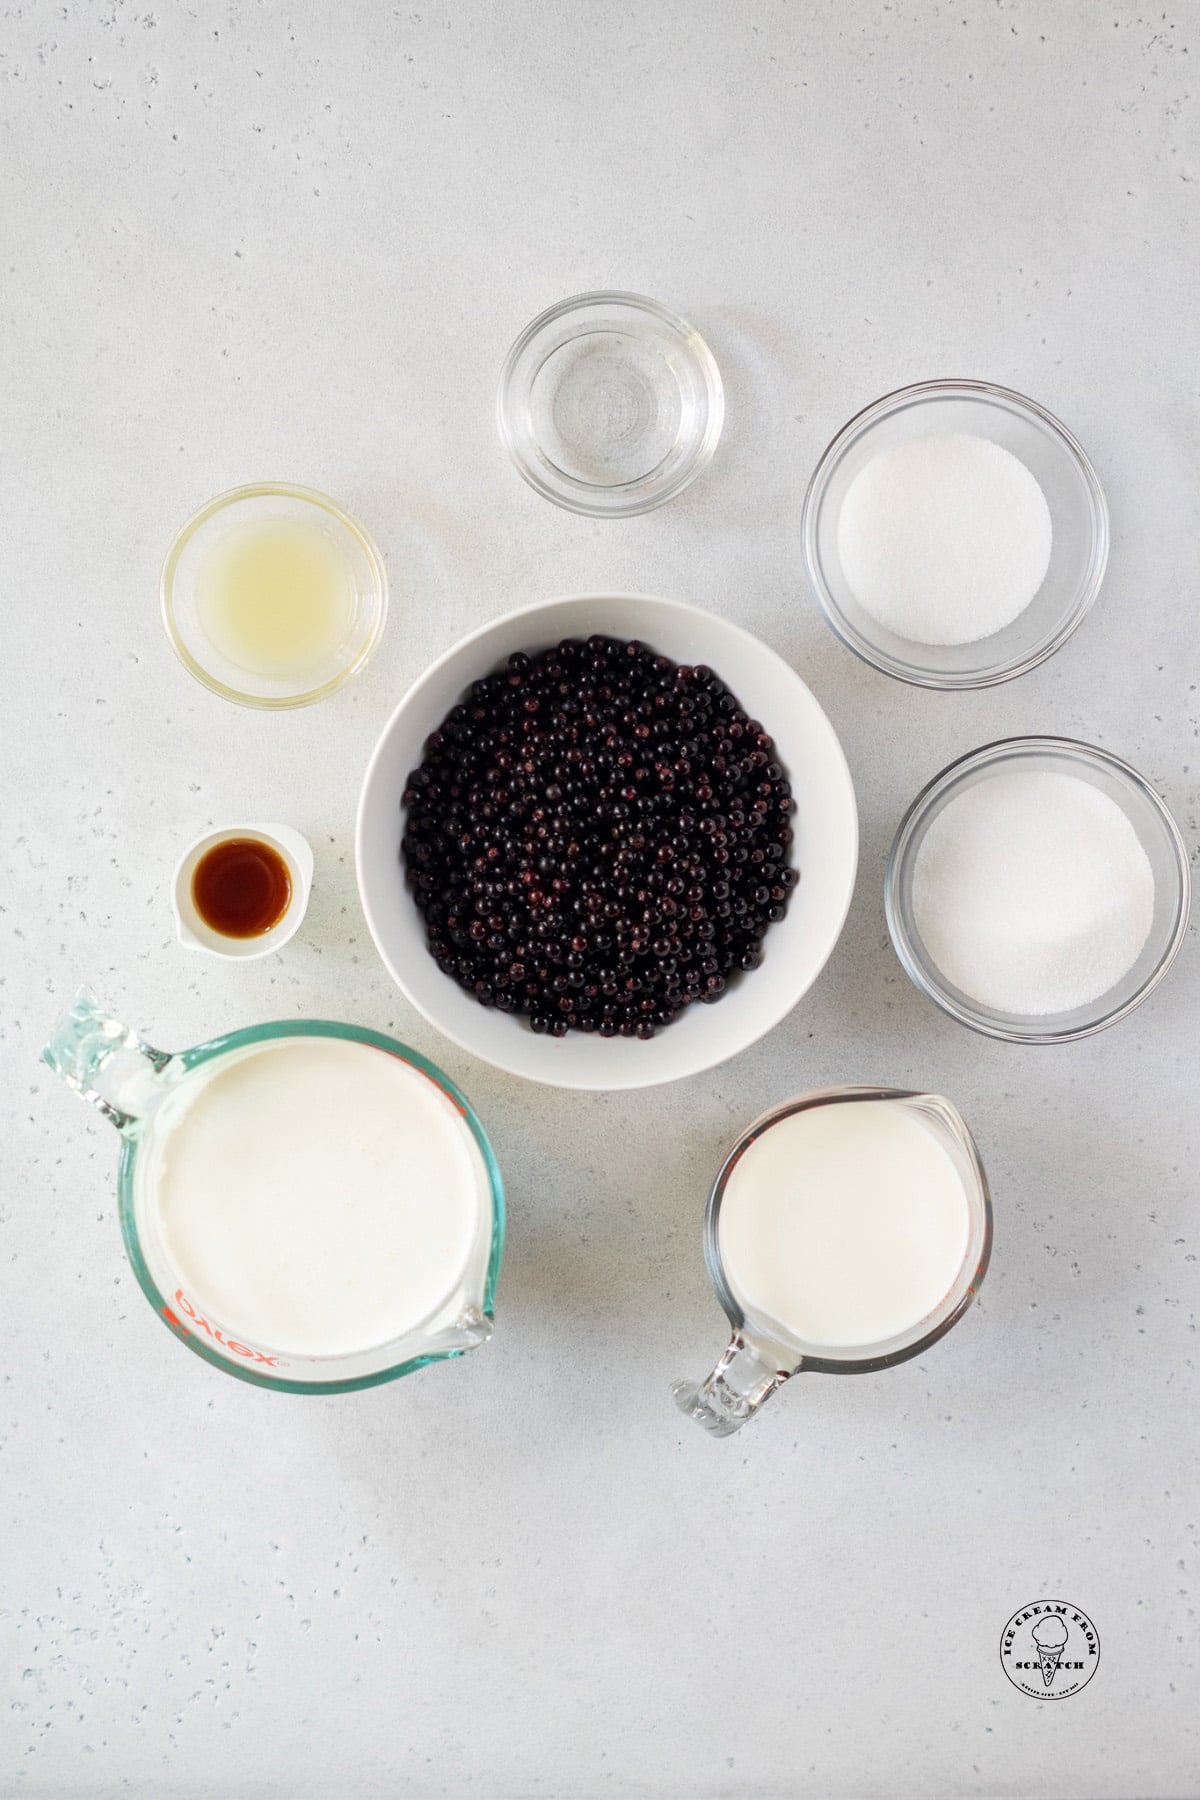 a white bowl filled with huckleberries, surrounded by the other ingredients needed to make huckleberry ice cream.